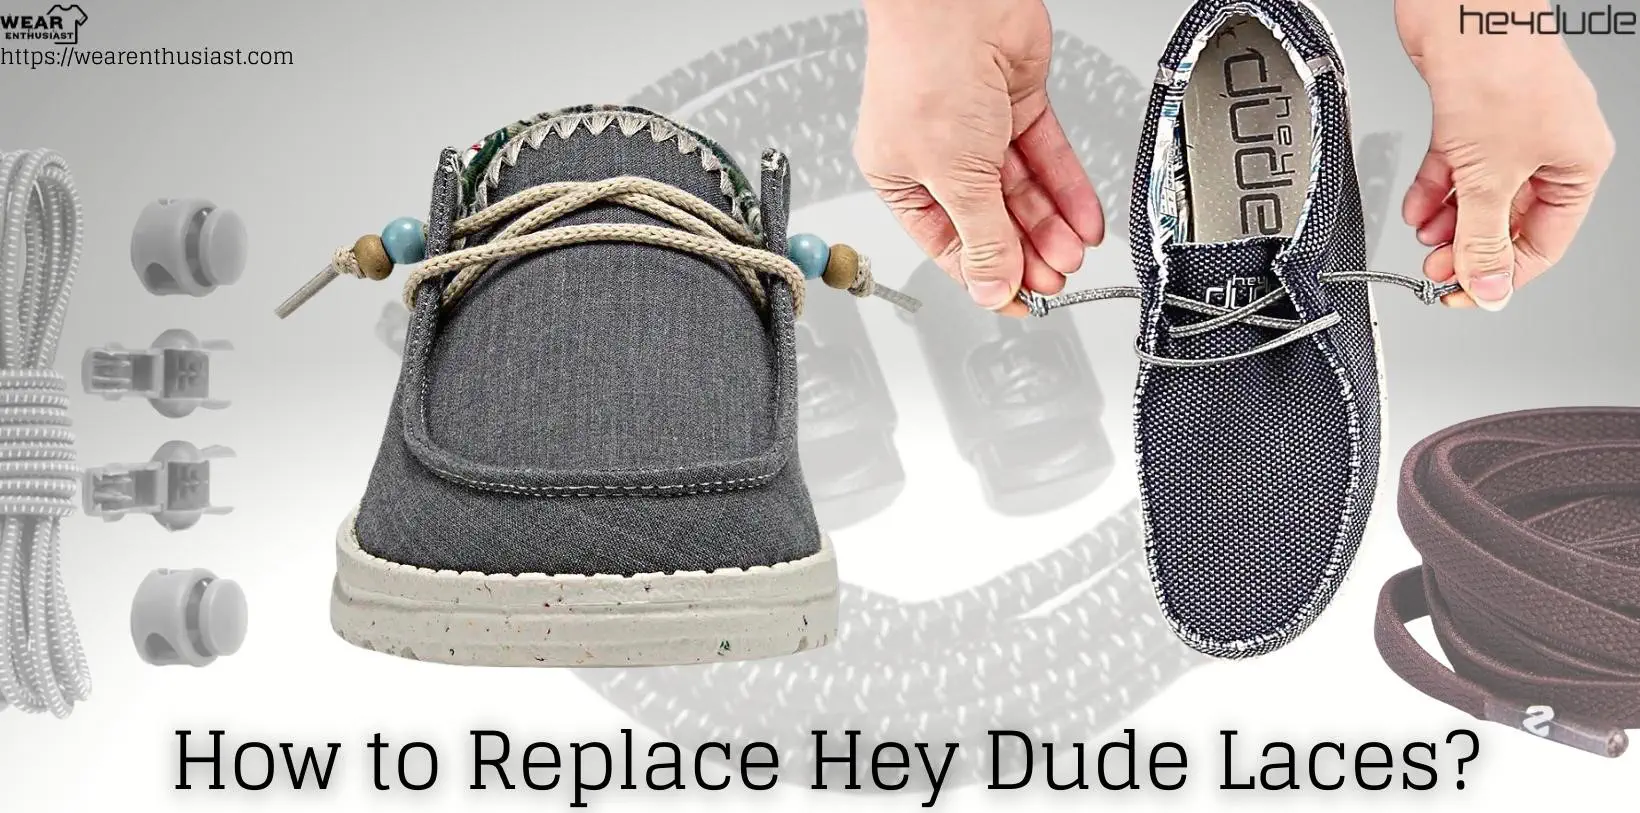 How to Replace Hey Dude Laces?